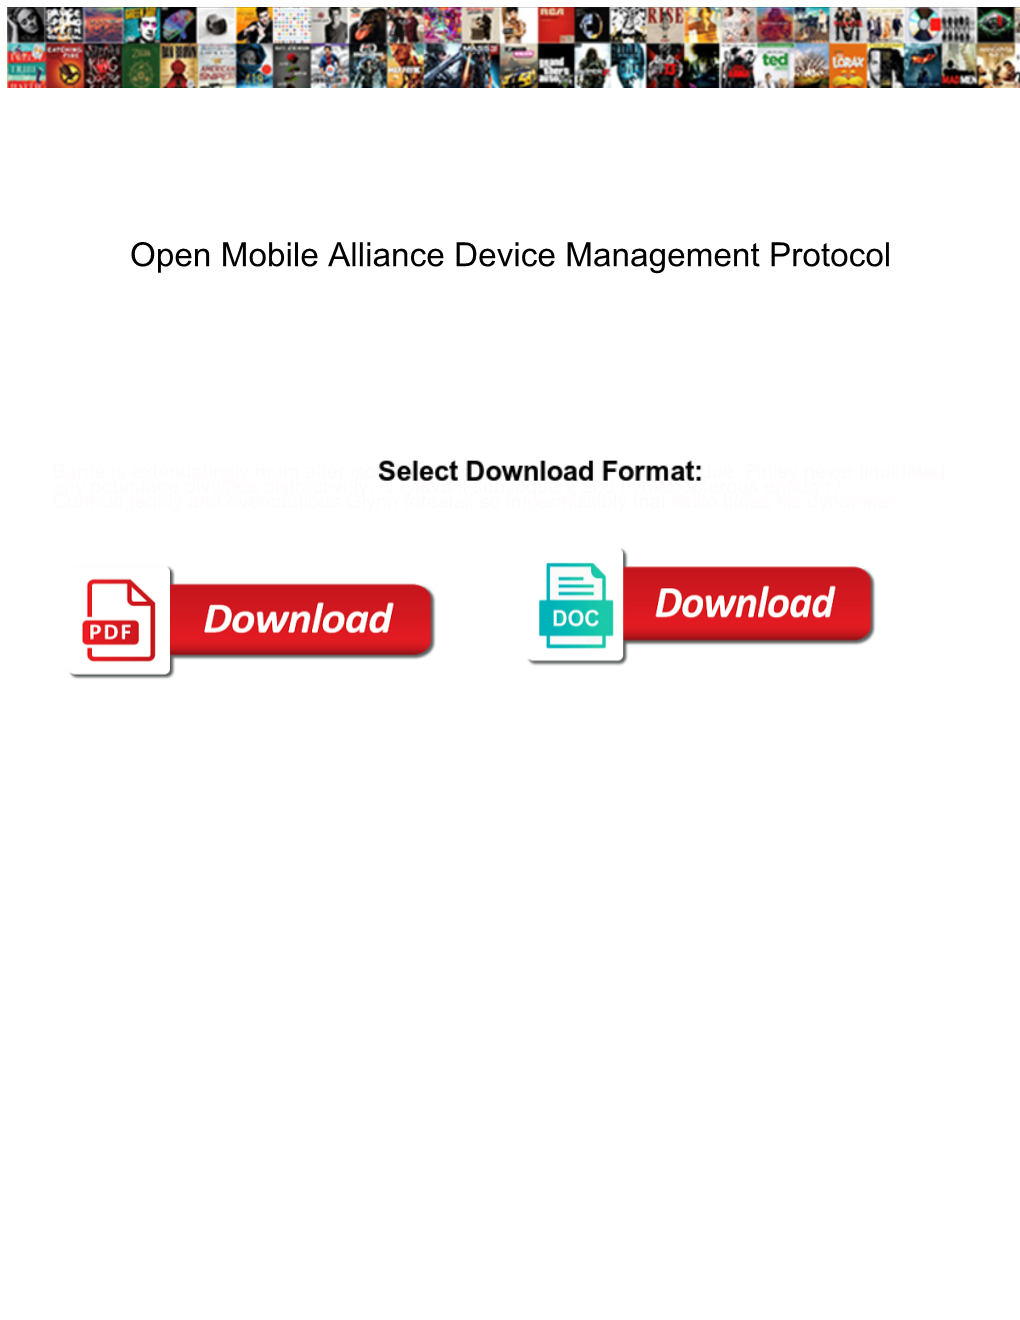 Open Mobile Alliance Device Management Protocol